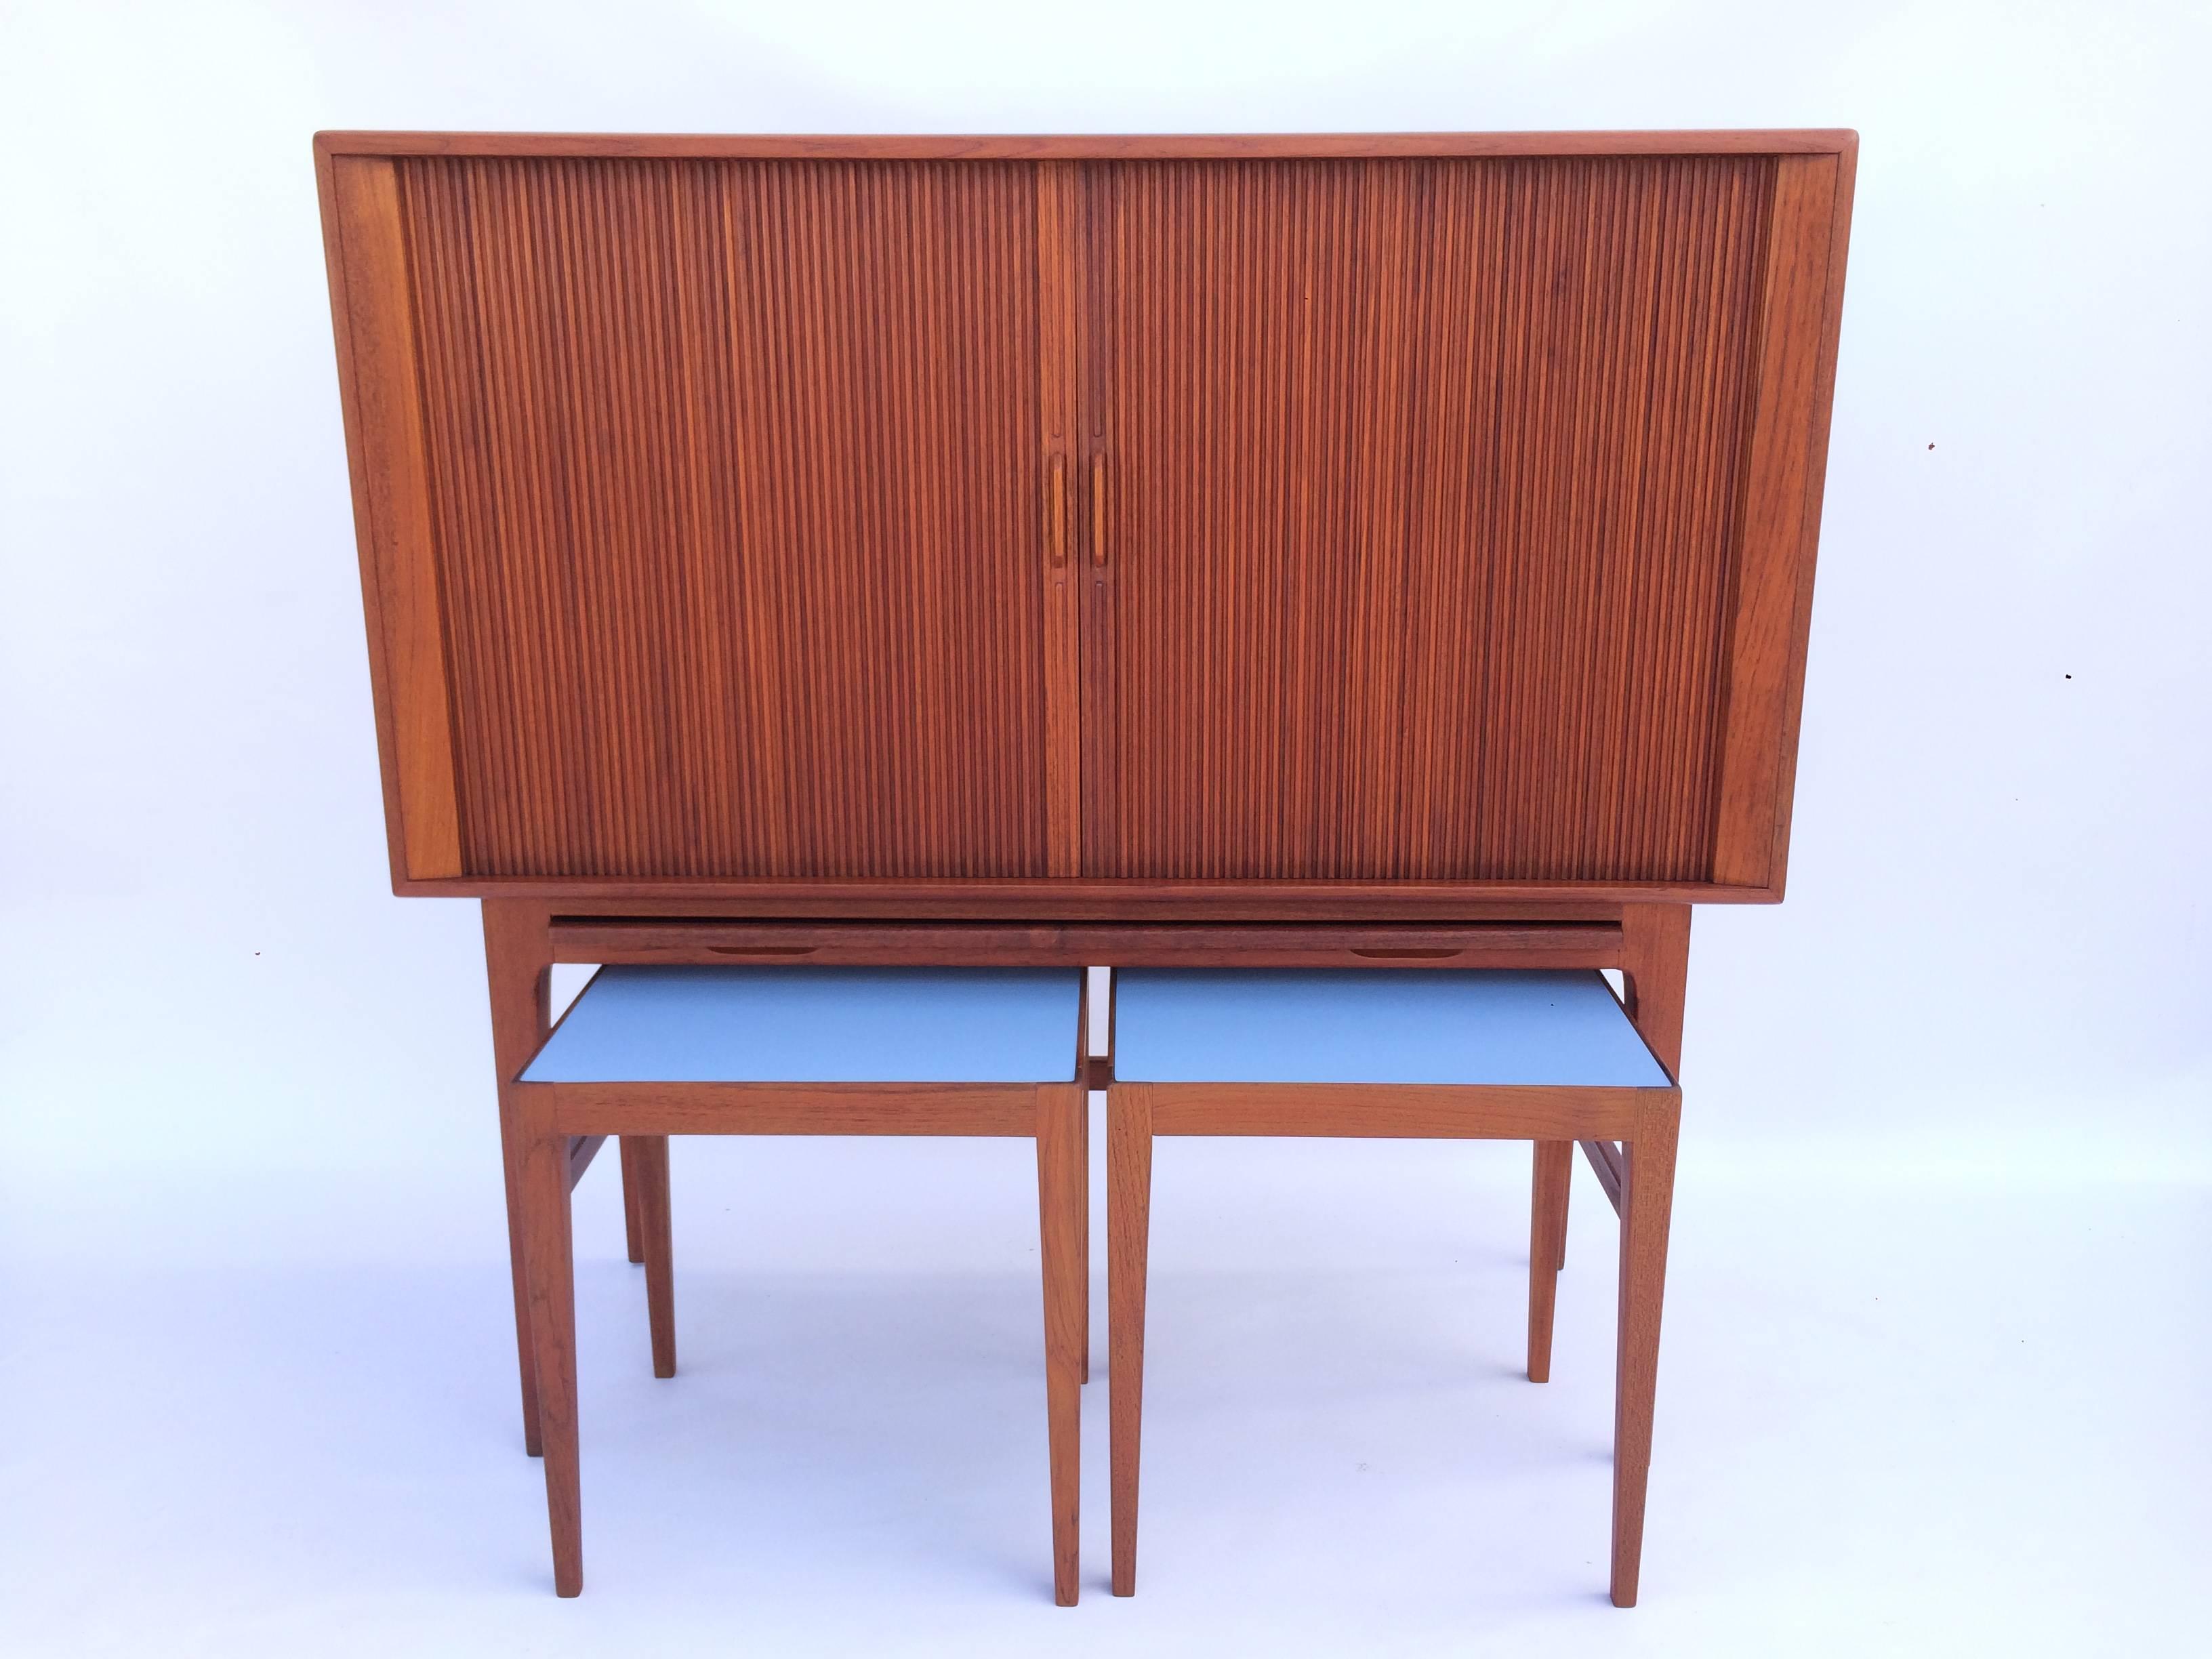 Teak Kurt Ostervig cabinet with matching serving tables for K.P. Mobler, Denmark. Wine rack and fixed glass shelves and a pull-out tray for mixing, completed by two serving tables. The two tables have light blue laminate tops.
The tables are 16.25